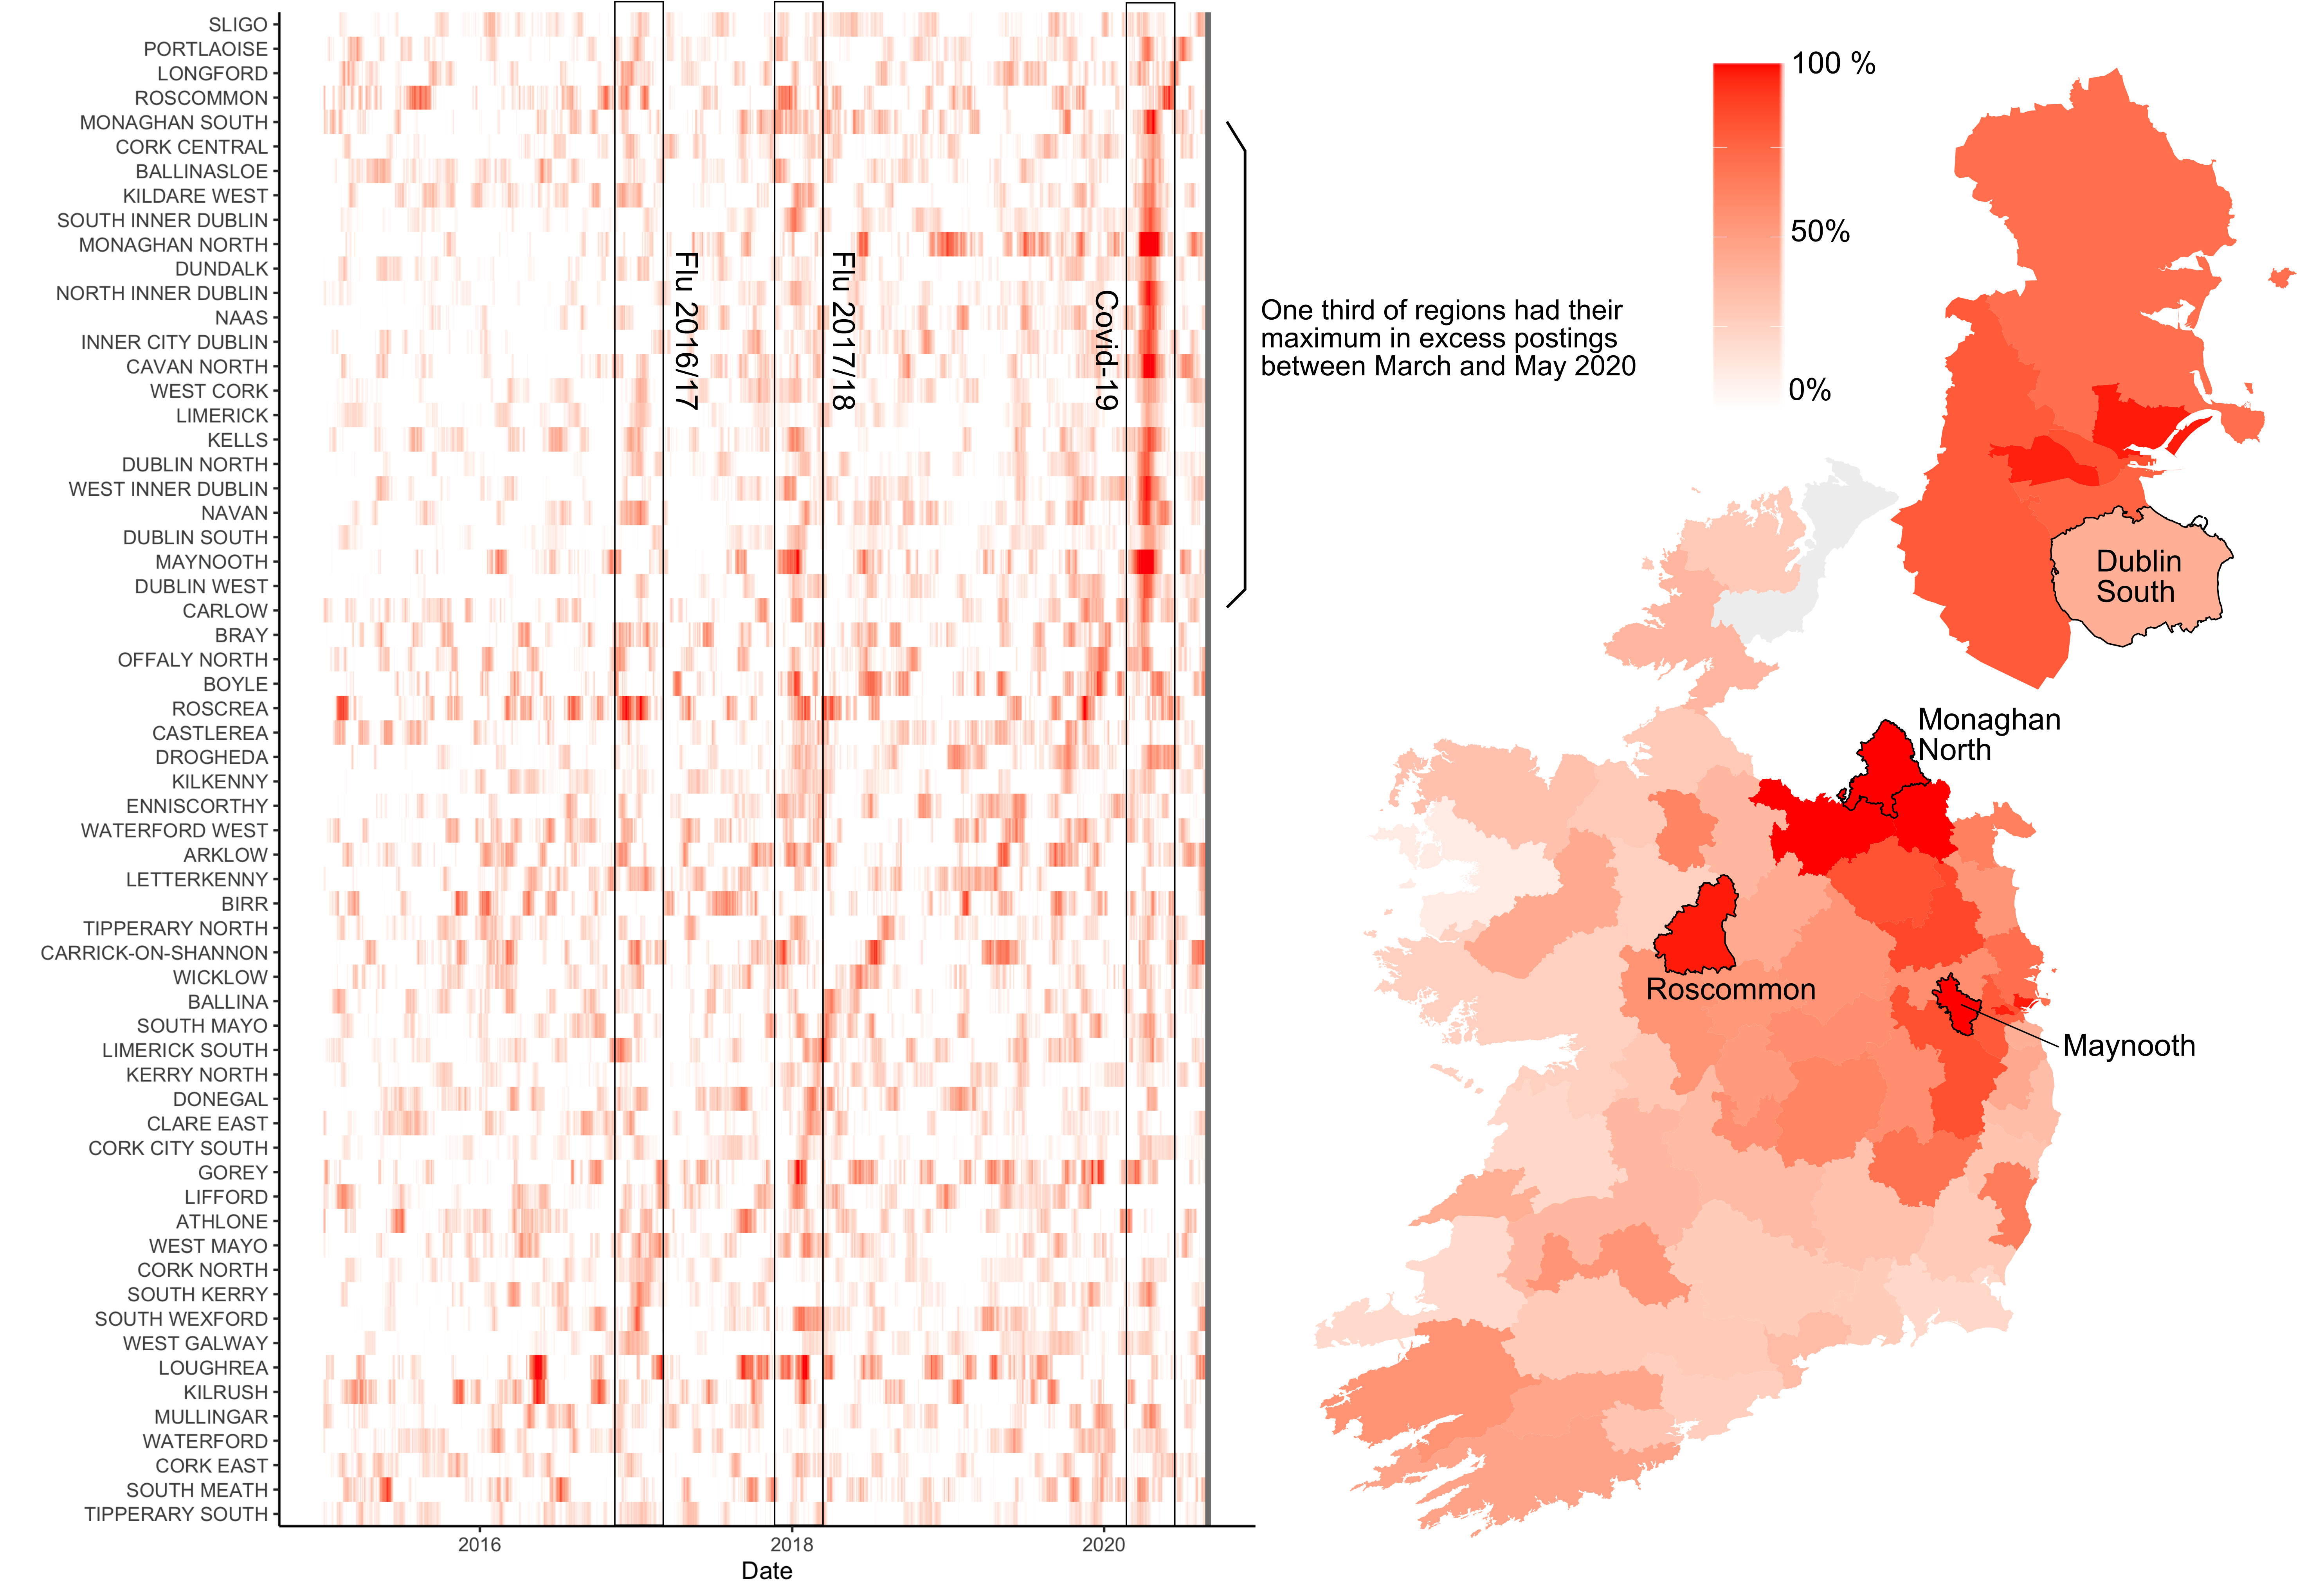 Percentage postings above normal are shown at regional level from 2014–2020. The flu seasons of 2016/17 and 2017/18, and the Covid-19 first wave period are highlighted. The map shows the maximum percentage above normal reached during the Covid–19 period. 